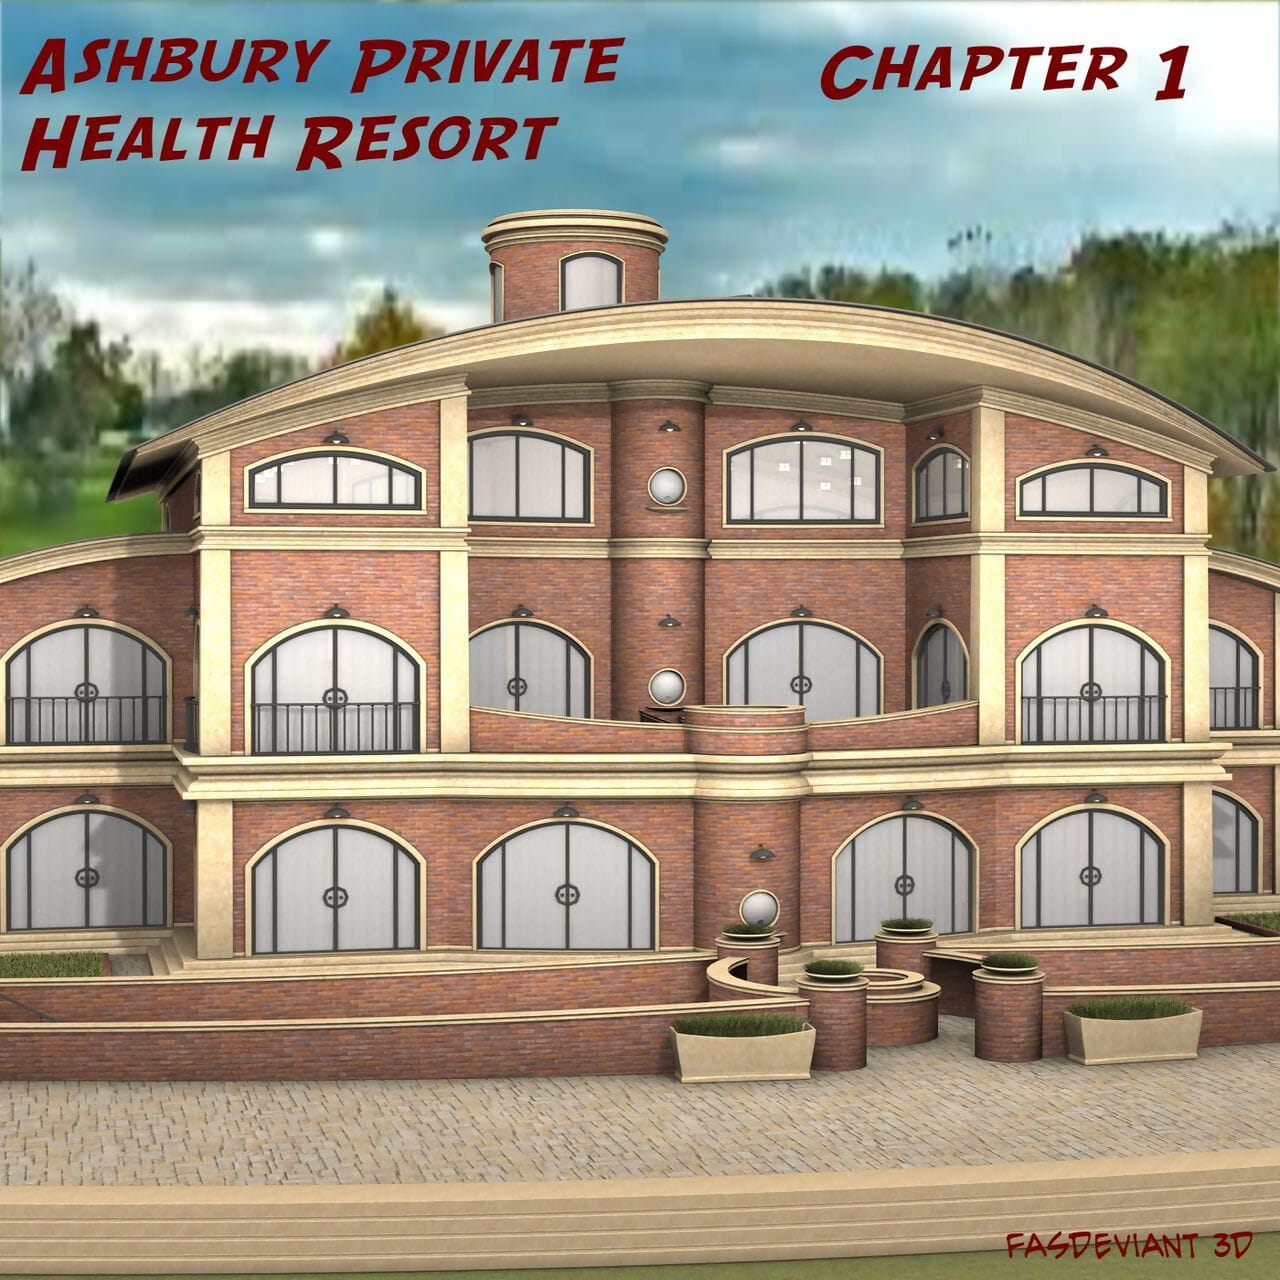 Fasdeviant Ashbury Private Health Resort - Chapter 1 page 1